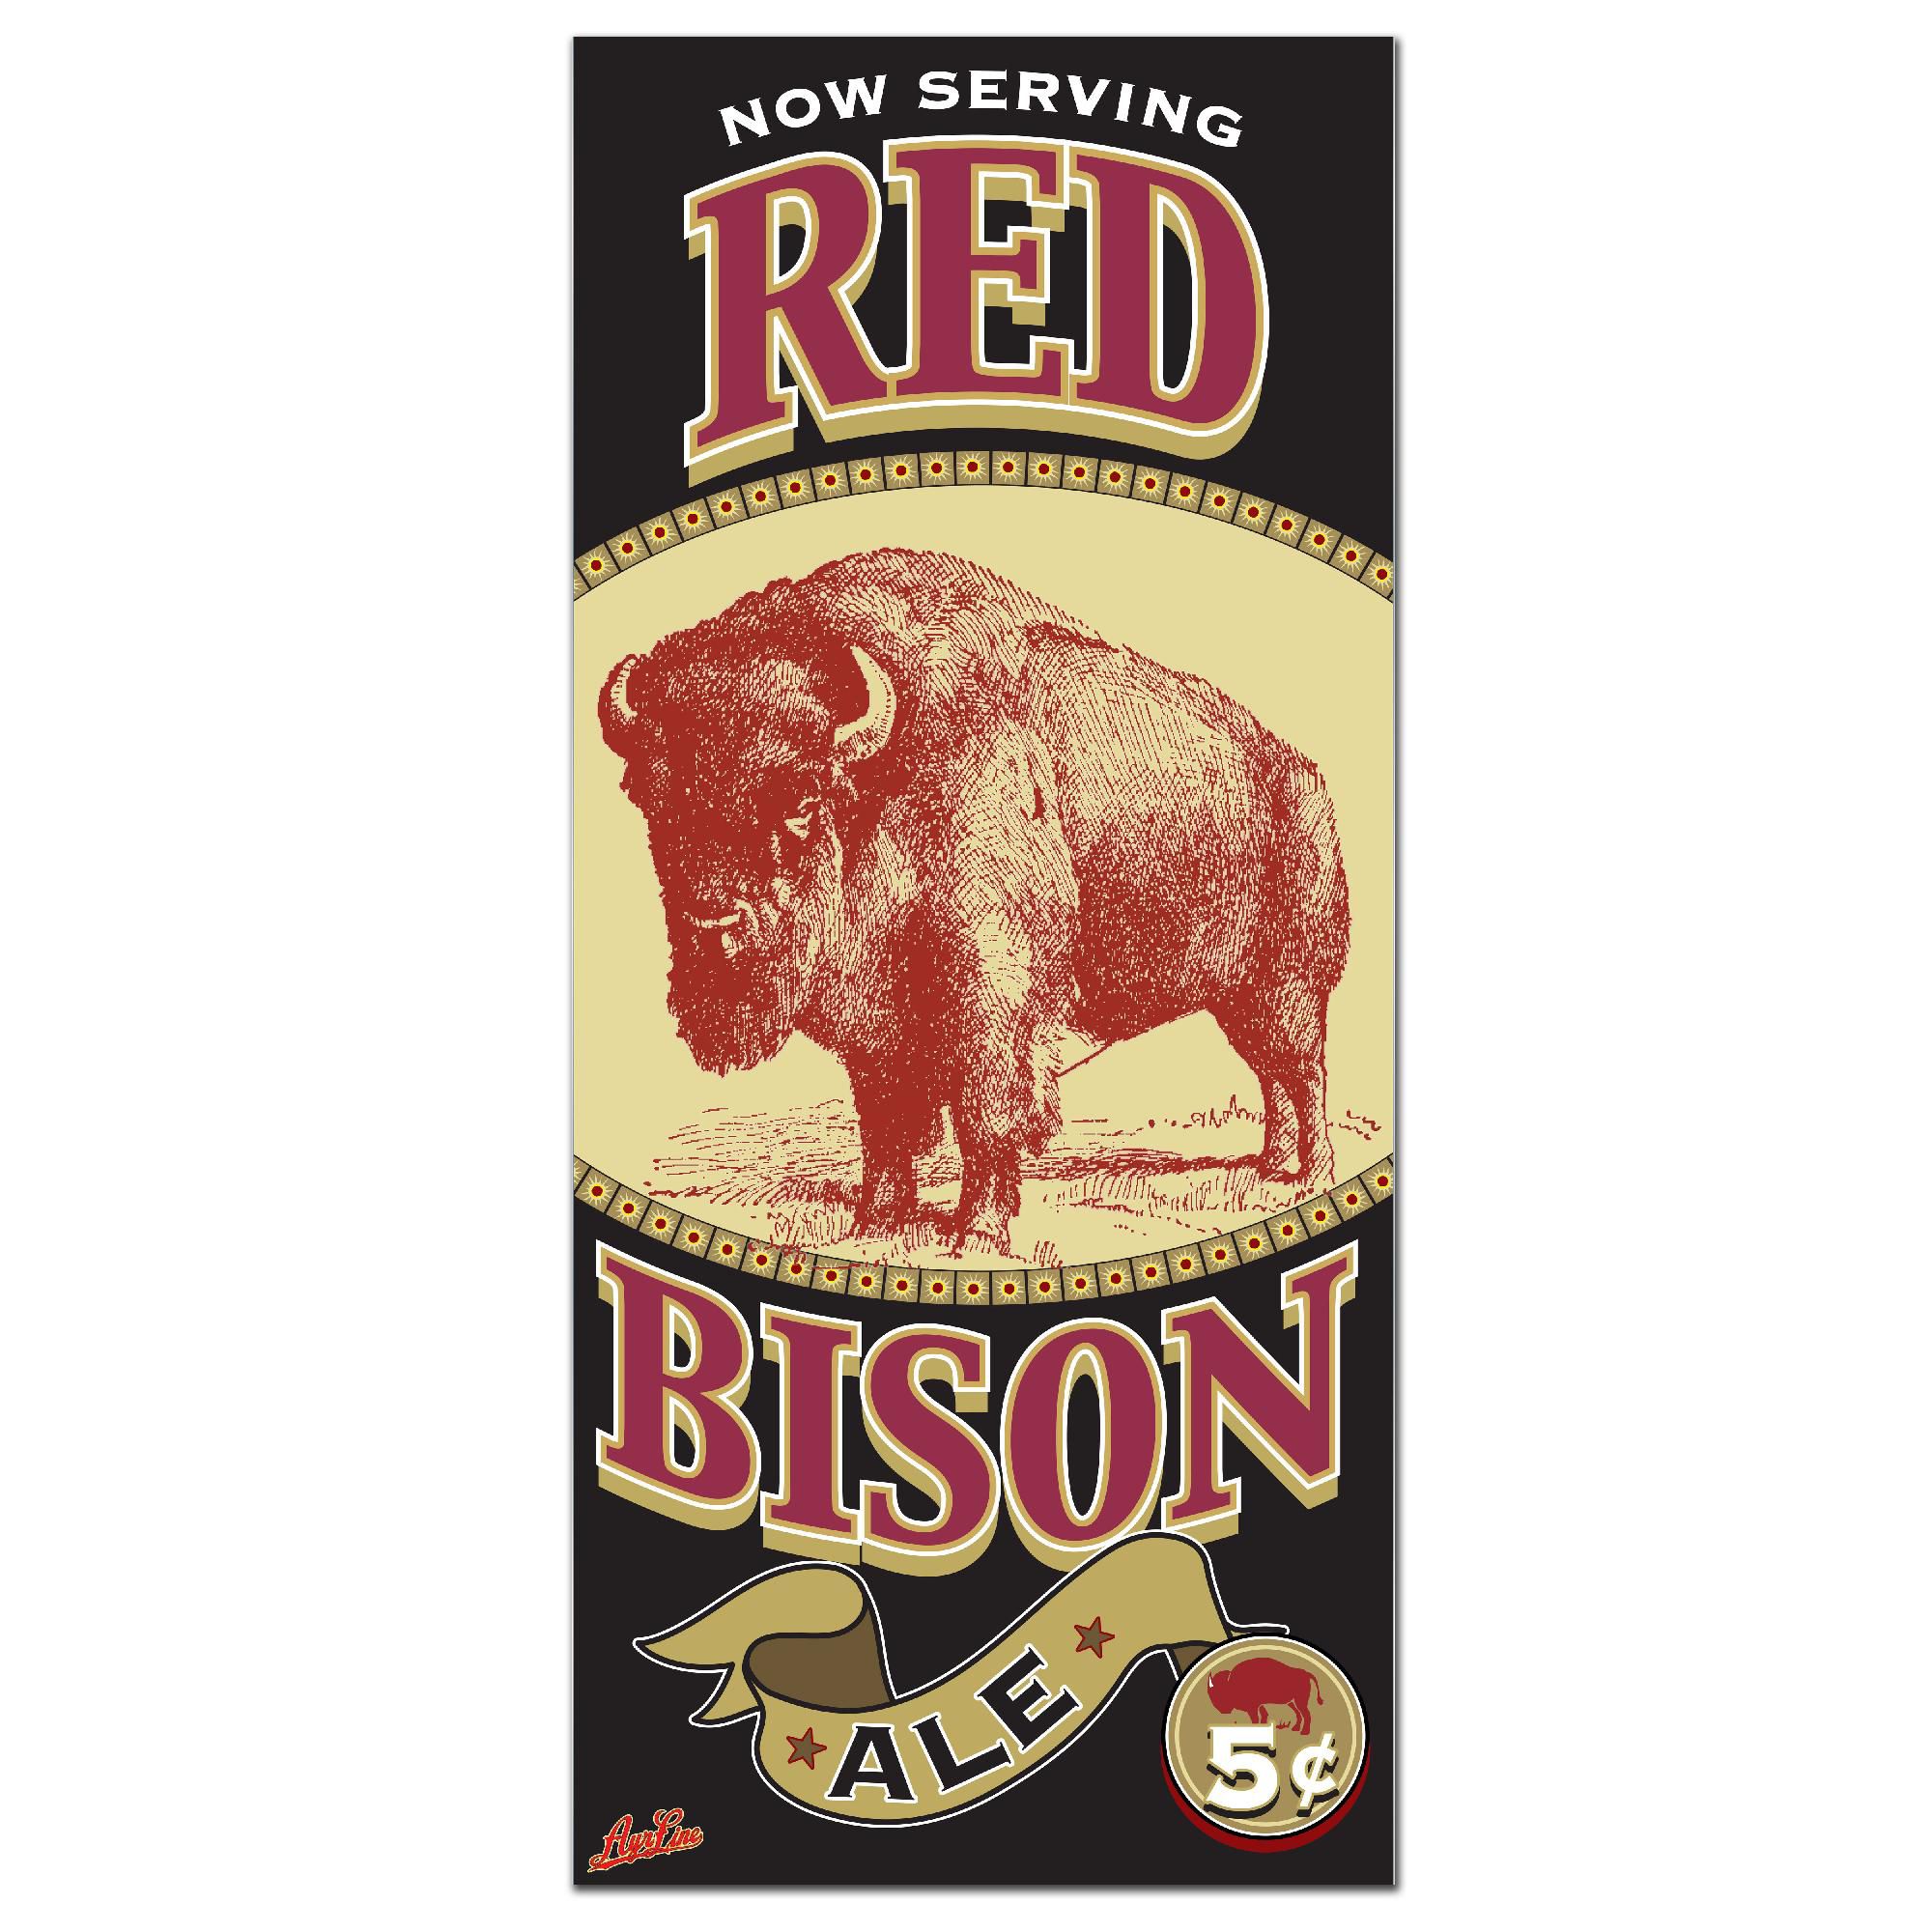 14x32 inches "Red Bison Ale" by Ayr*Line